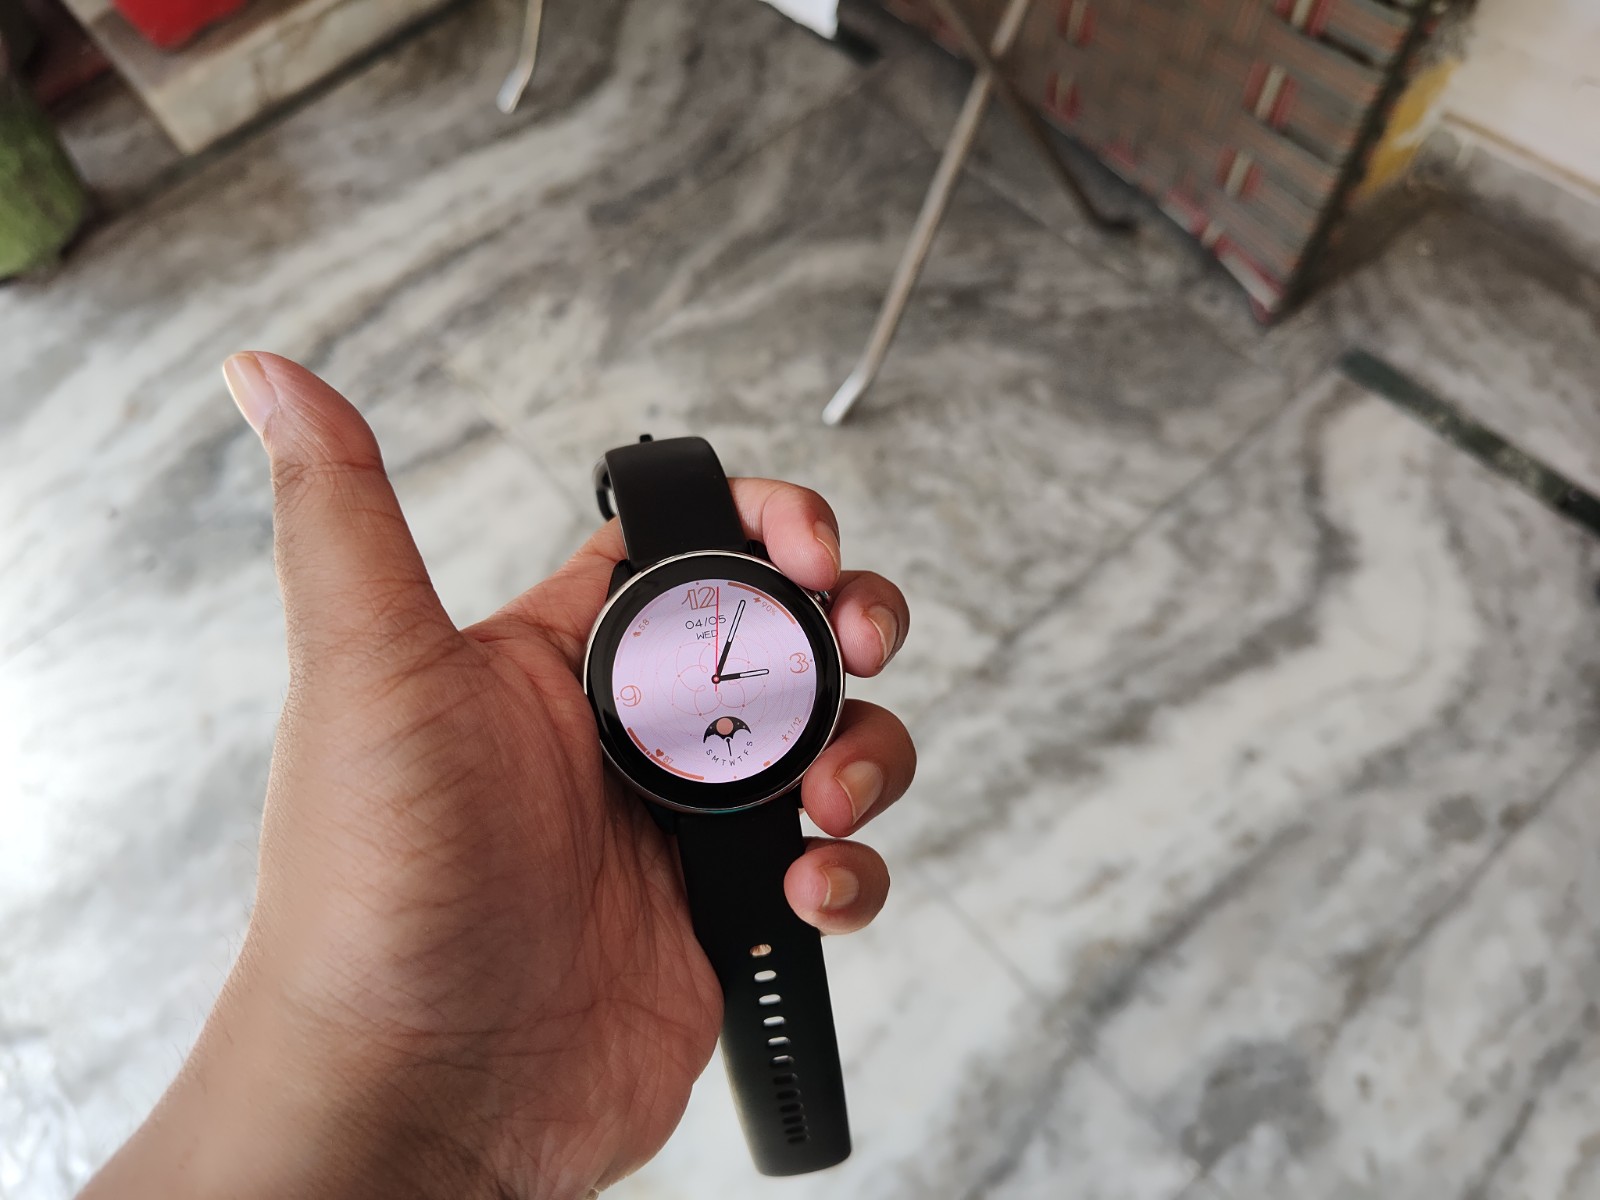 Amazfit GTR Mini Review - Smartwatch Combining Style and